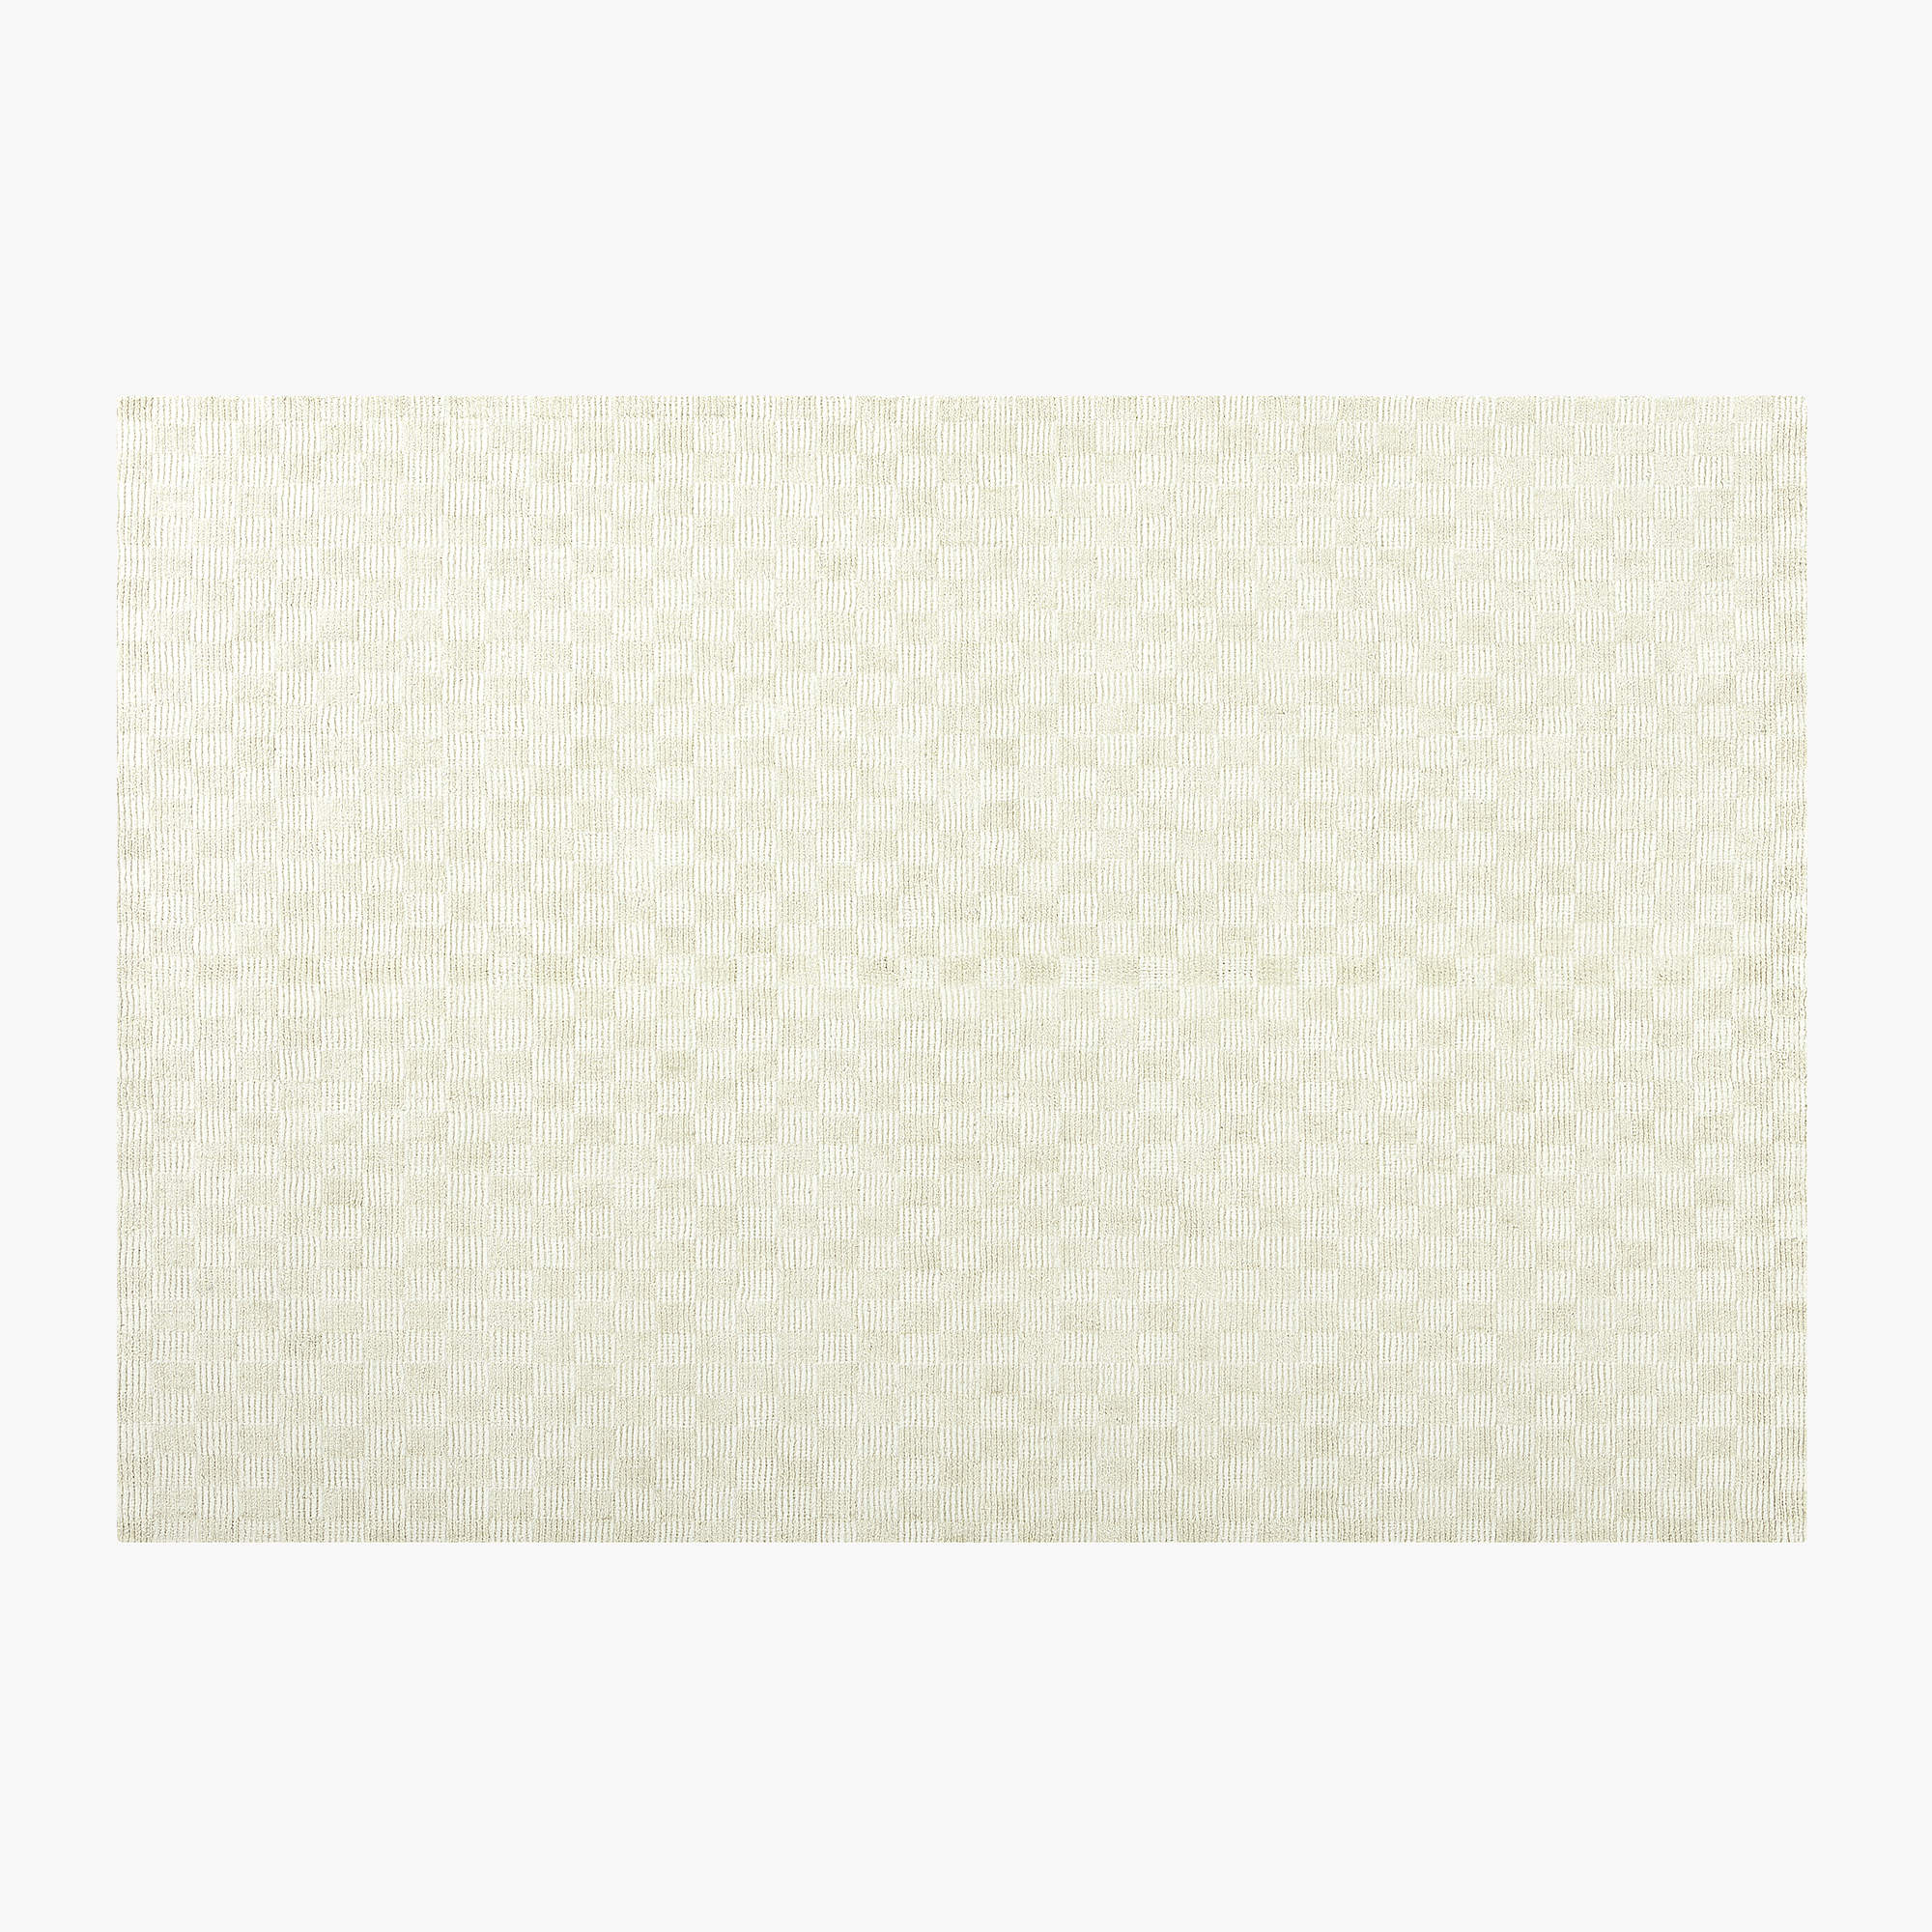 Stassi Warm White Check New Zealand Wool and Jute Area Rug 6'x9' | CB2